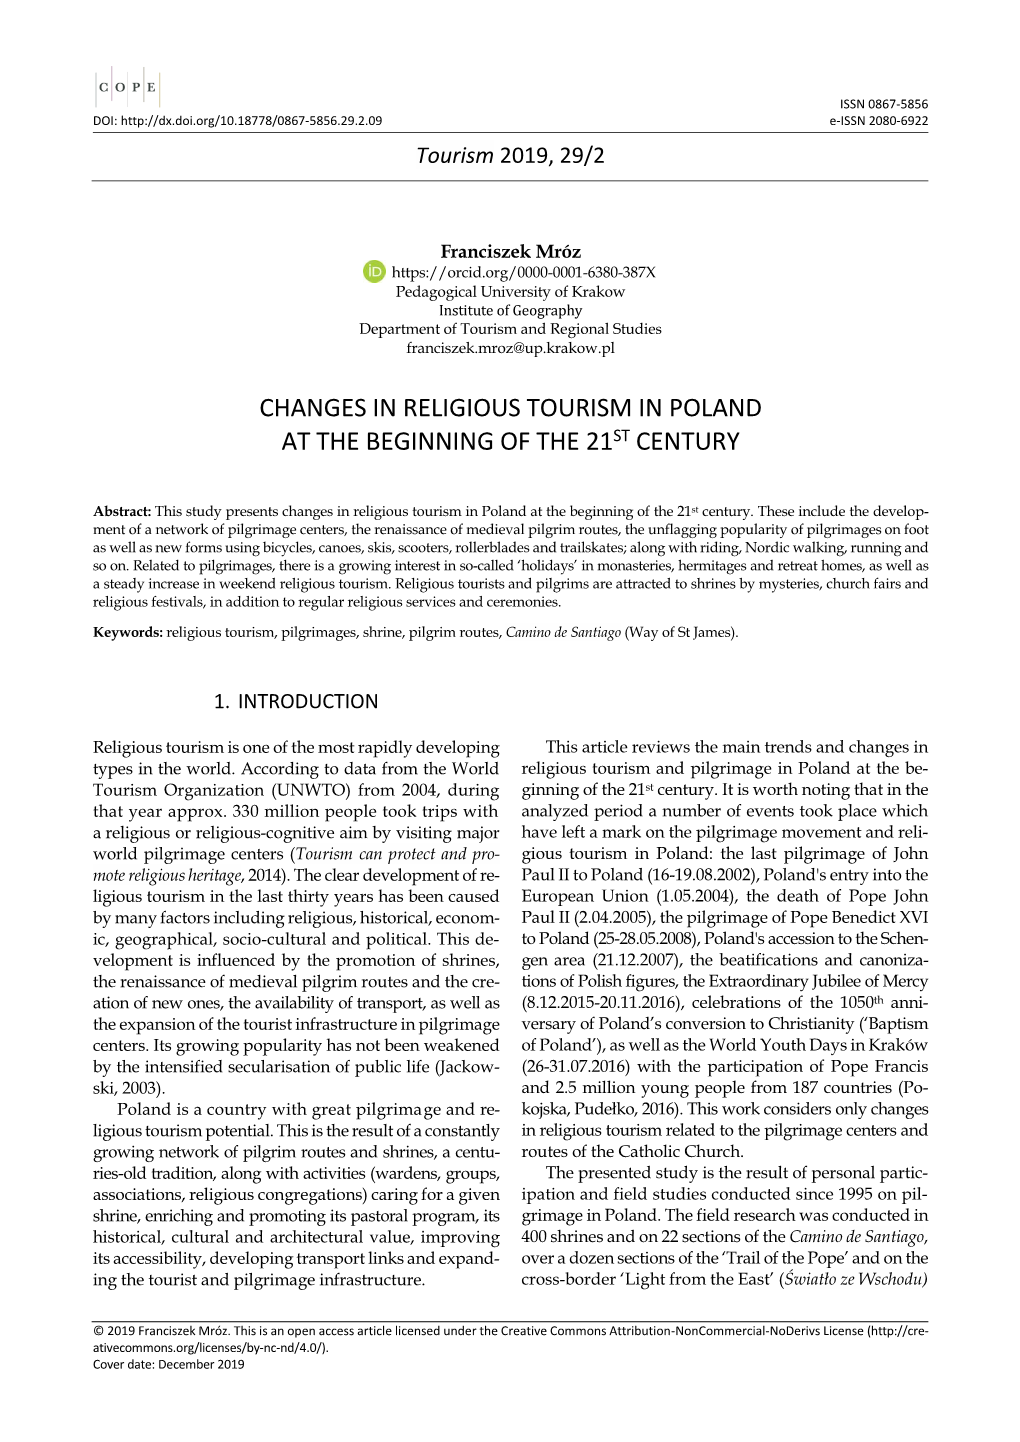 1Changes in Religious Tourism in Poland at The